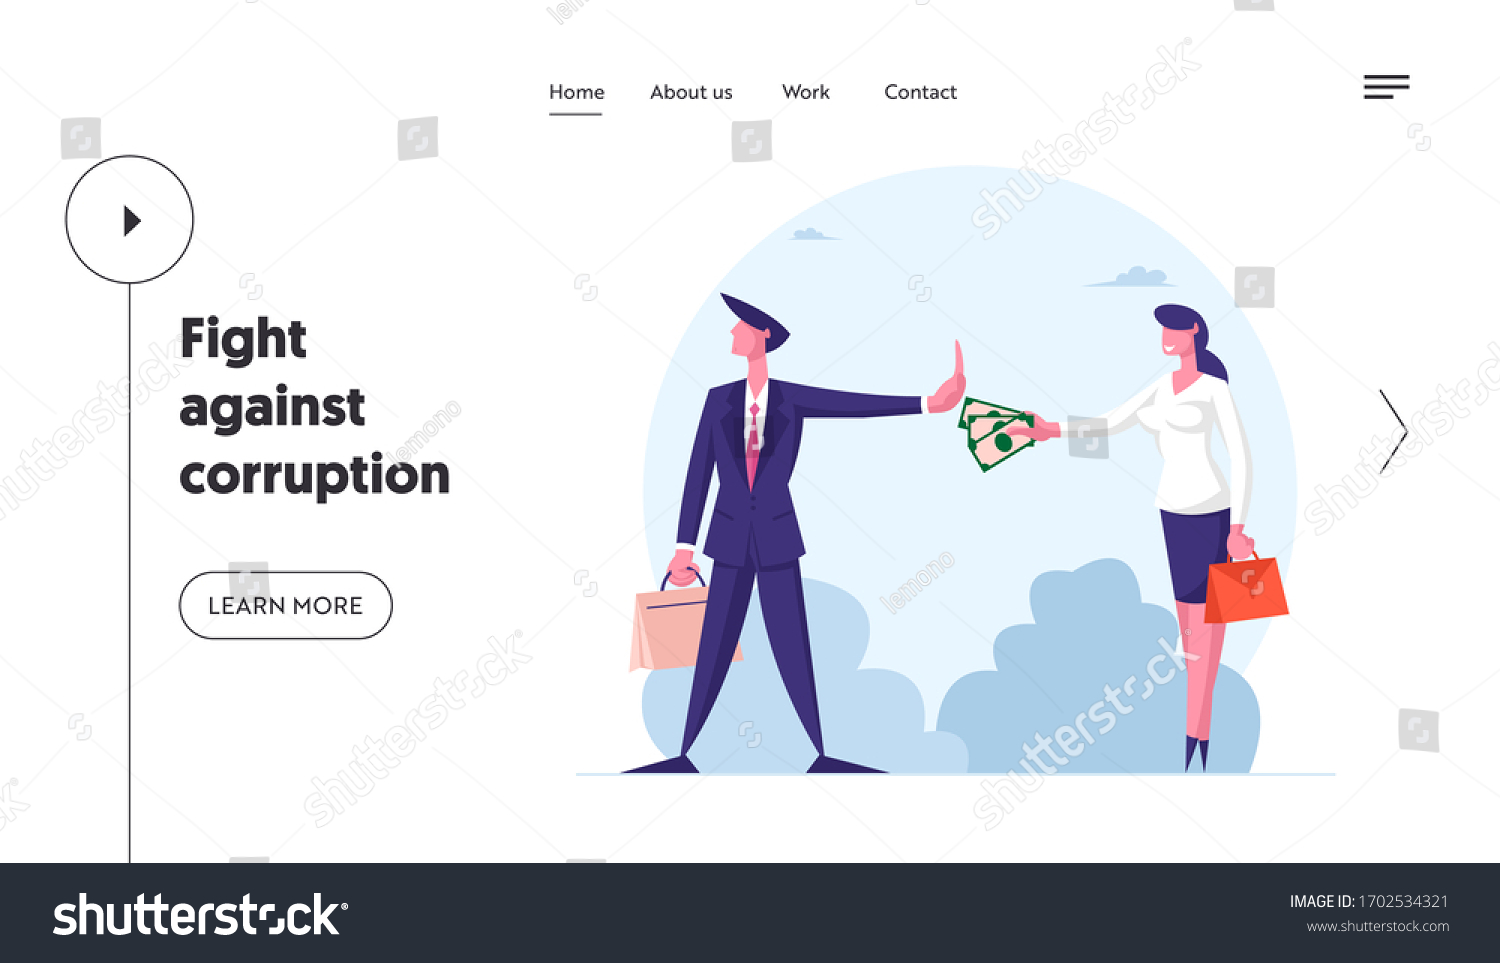 SVG of Anti Corruption Landing Page Template. Woman Give Envelope with Money to Businessman who Refuse Taking Bribe. Businesspeople during Corruption Deal. Cartoon People Characters Vector Illustration svg